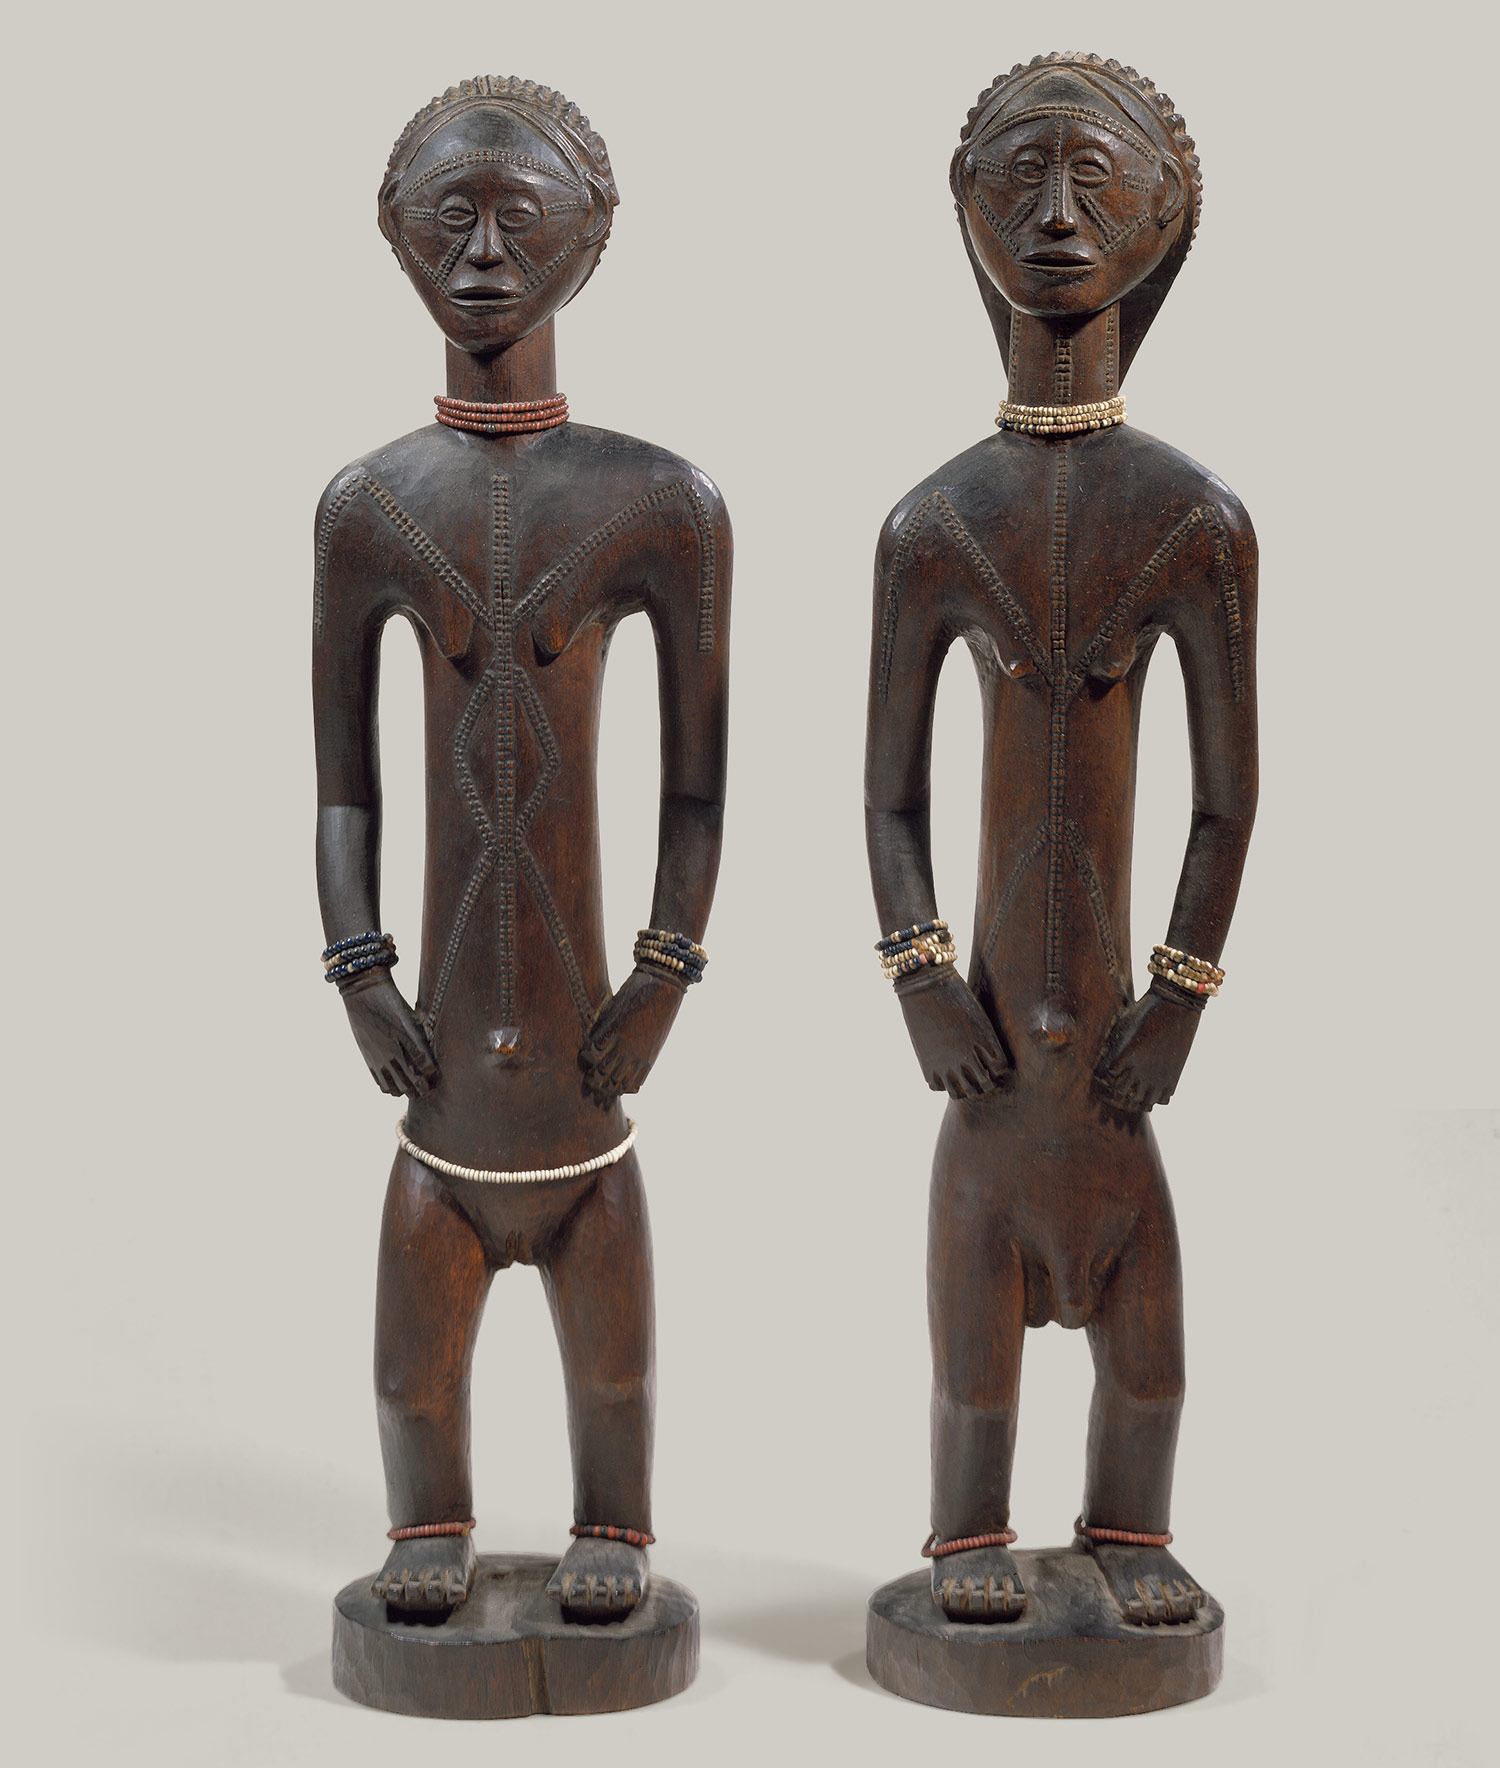 Standing Male and Female Figures, ca. 18th-19th century from the Democratic Republic of Congo.  Courtesy of the Heilbrunn Timeline from the Metropolitan Museum of Art.